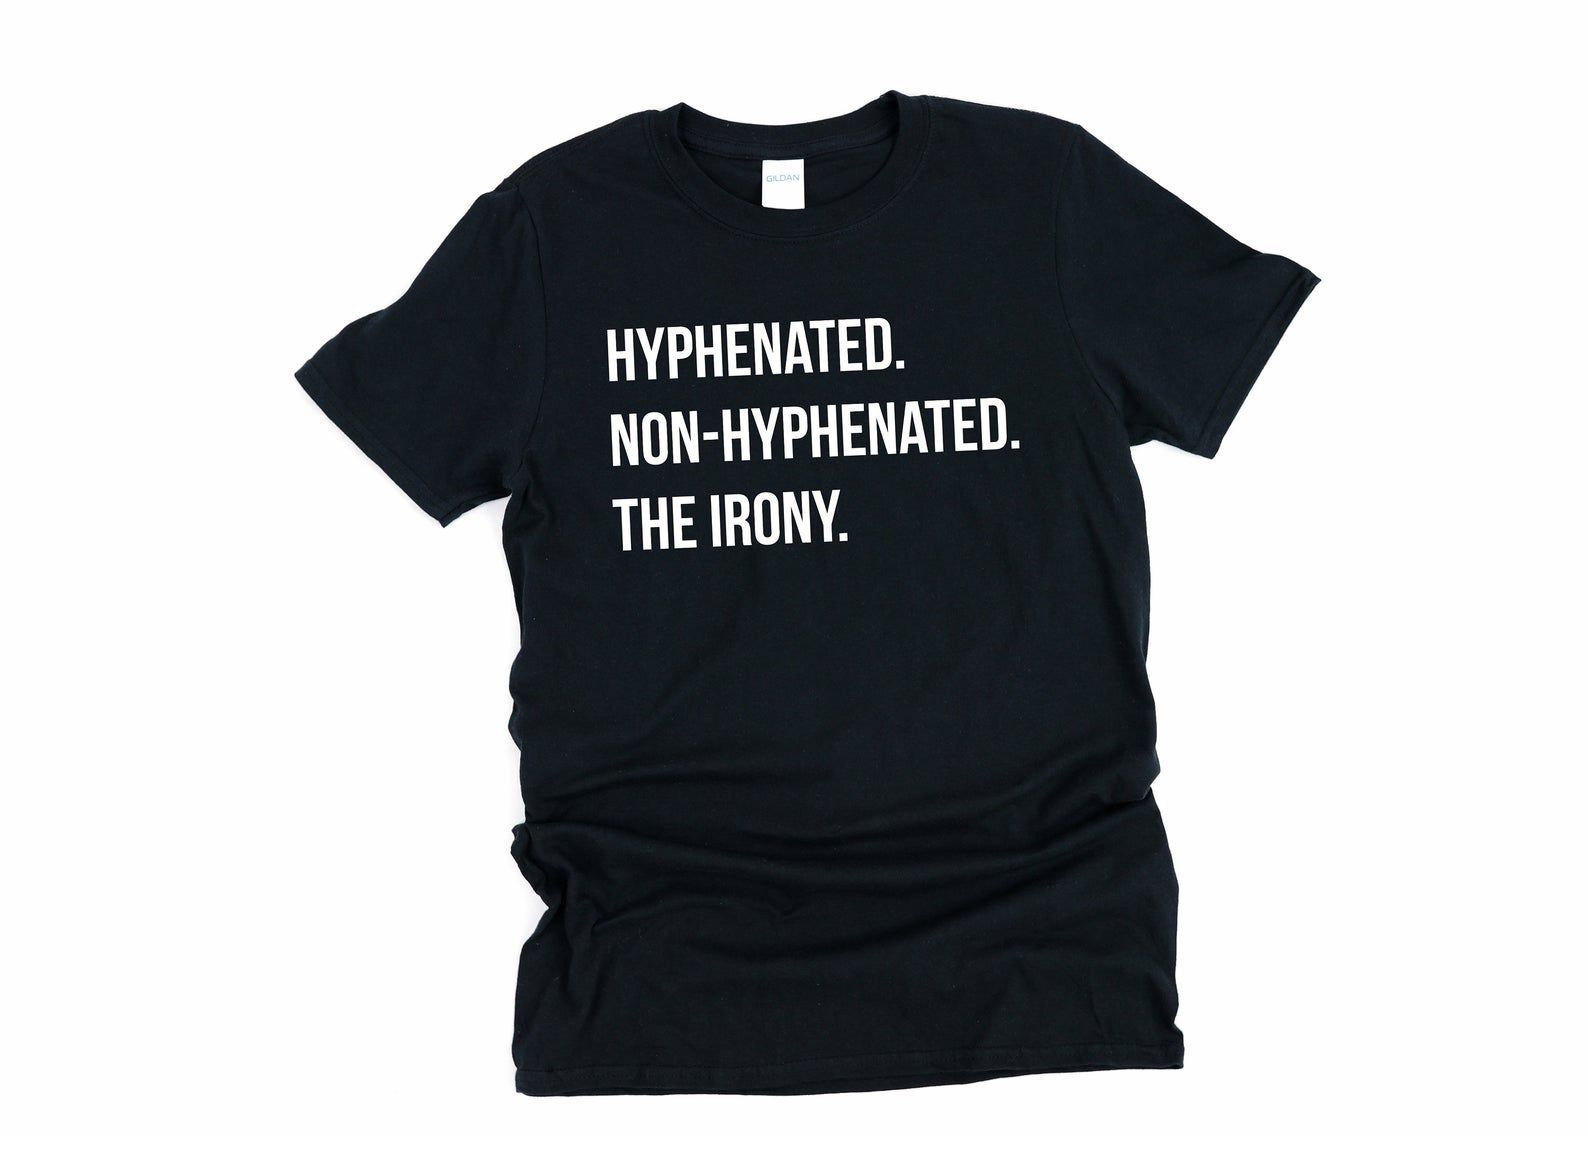 A black t-shirt that reads "Hyphenated. Non-hyphenated. The irony." in white lettering, all caps.